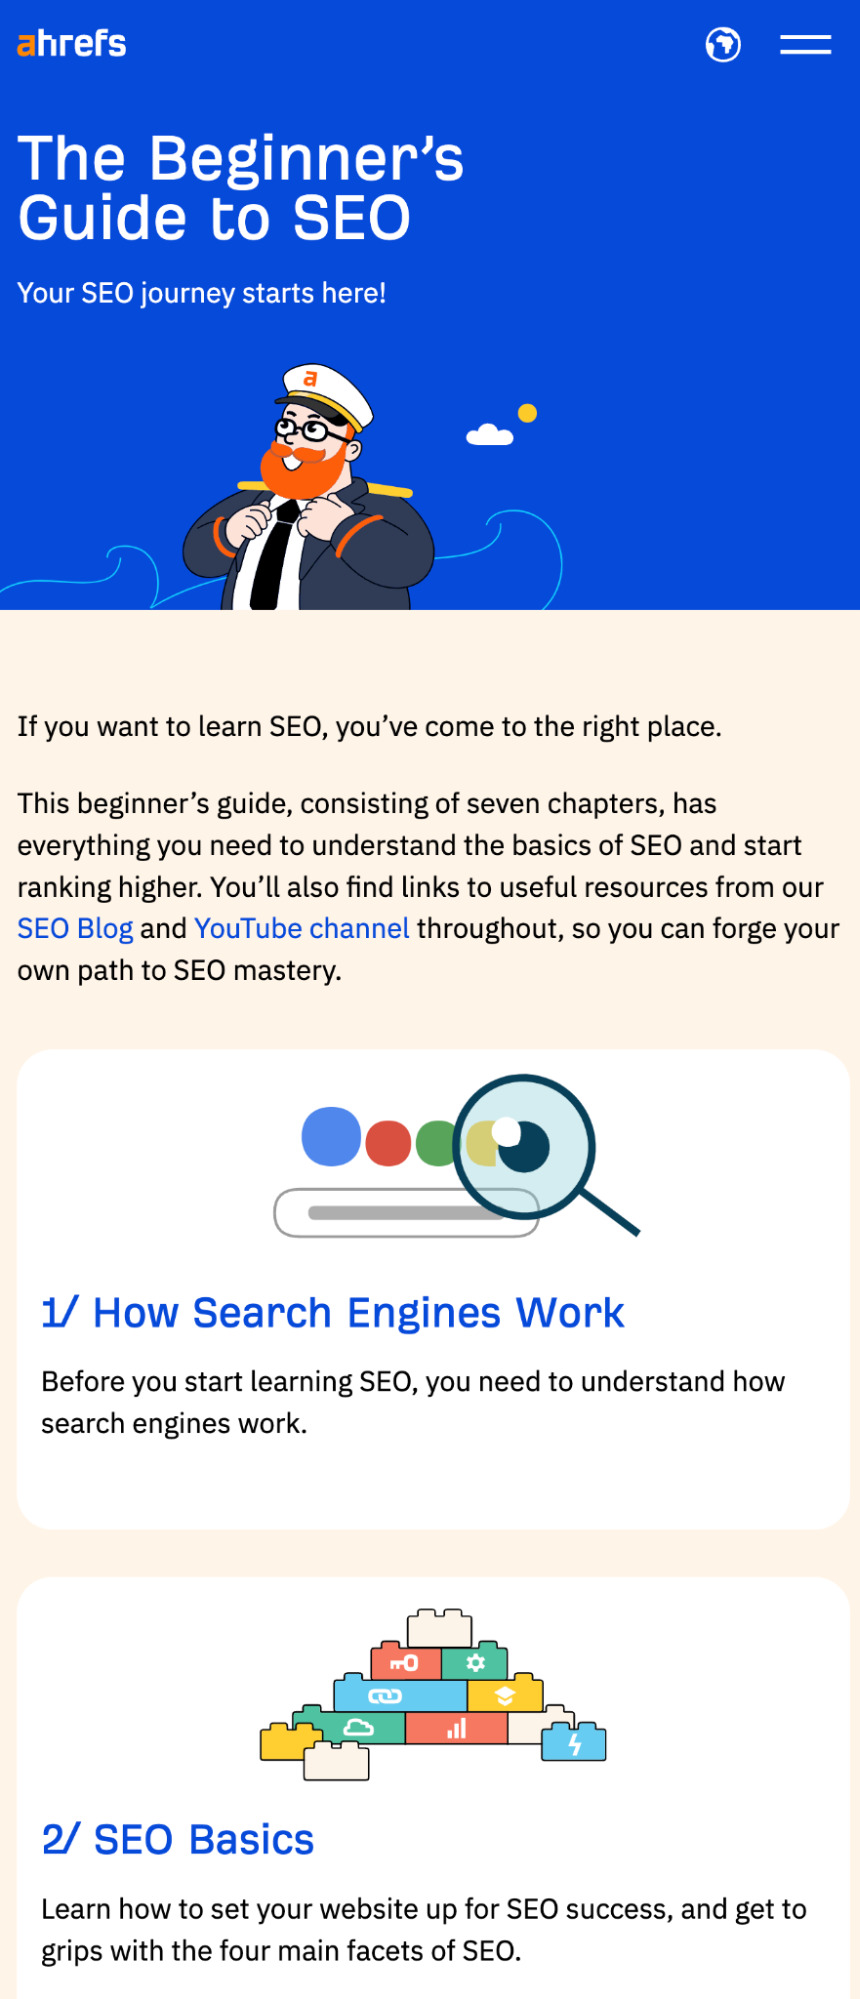 Our beginner's guide to SEO is a content hub
